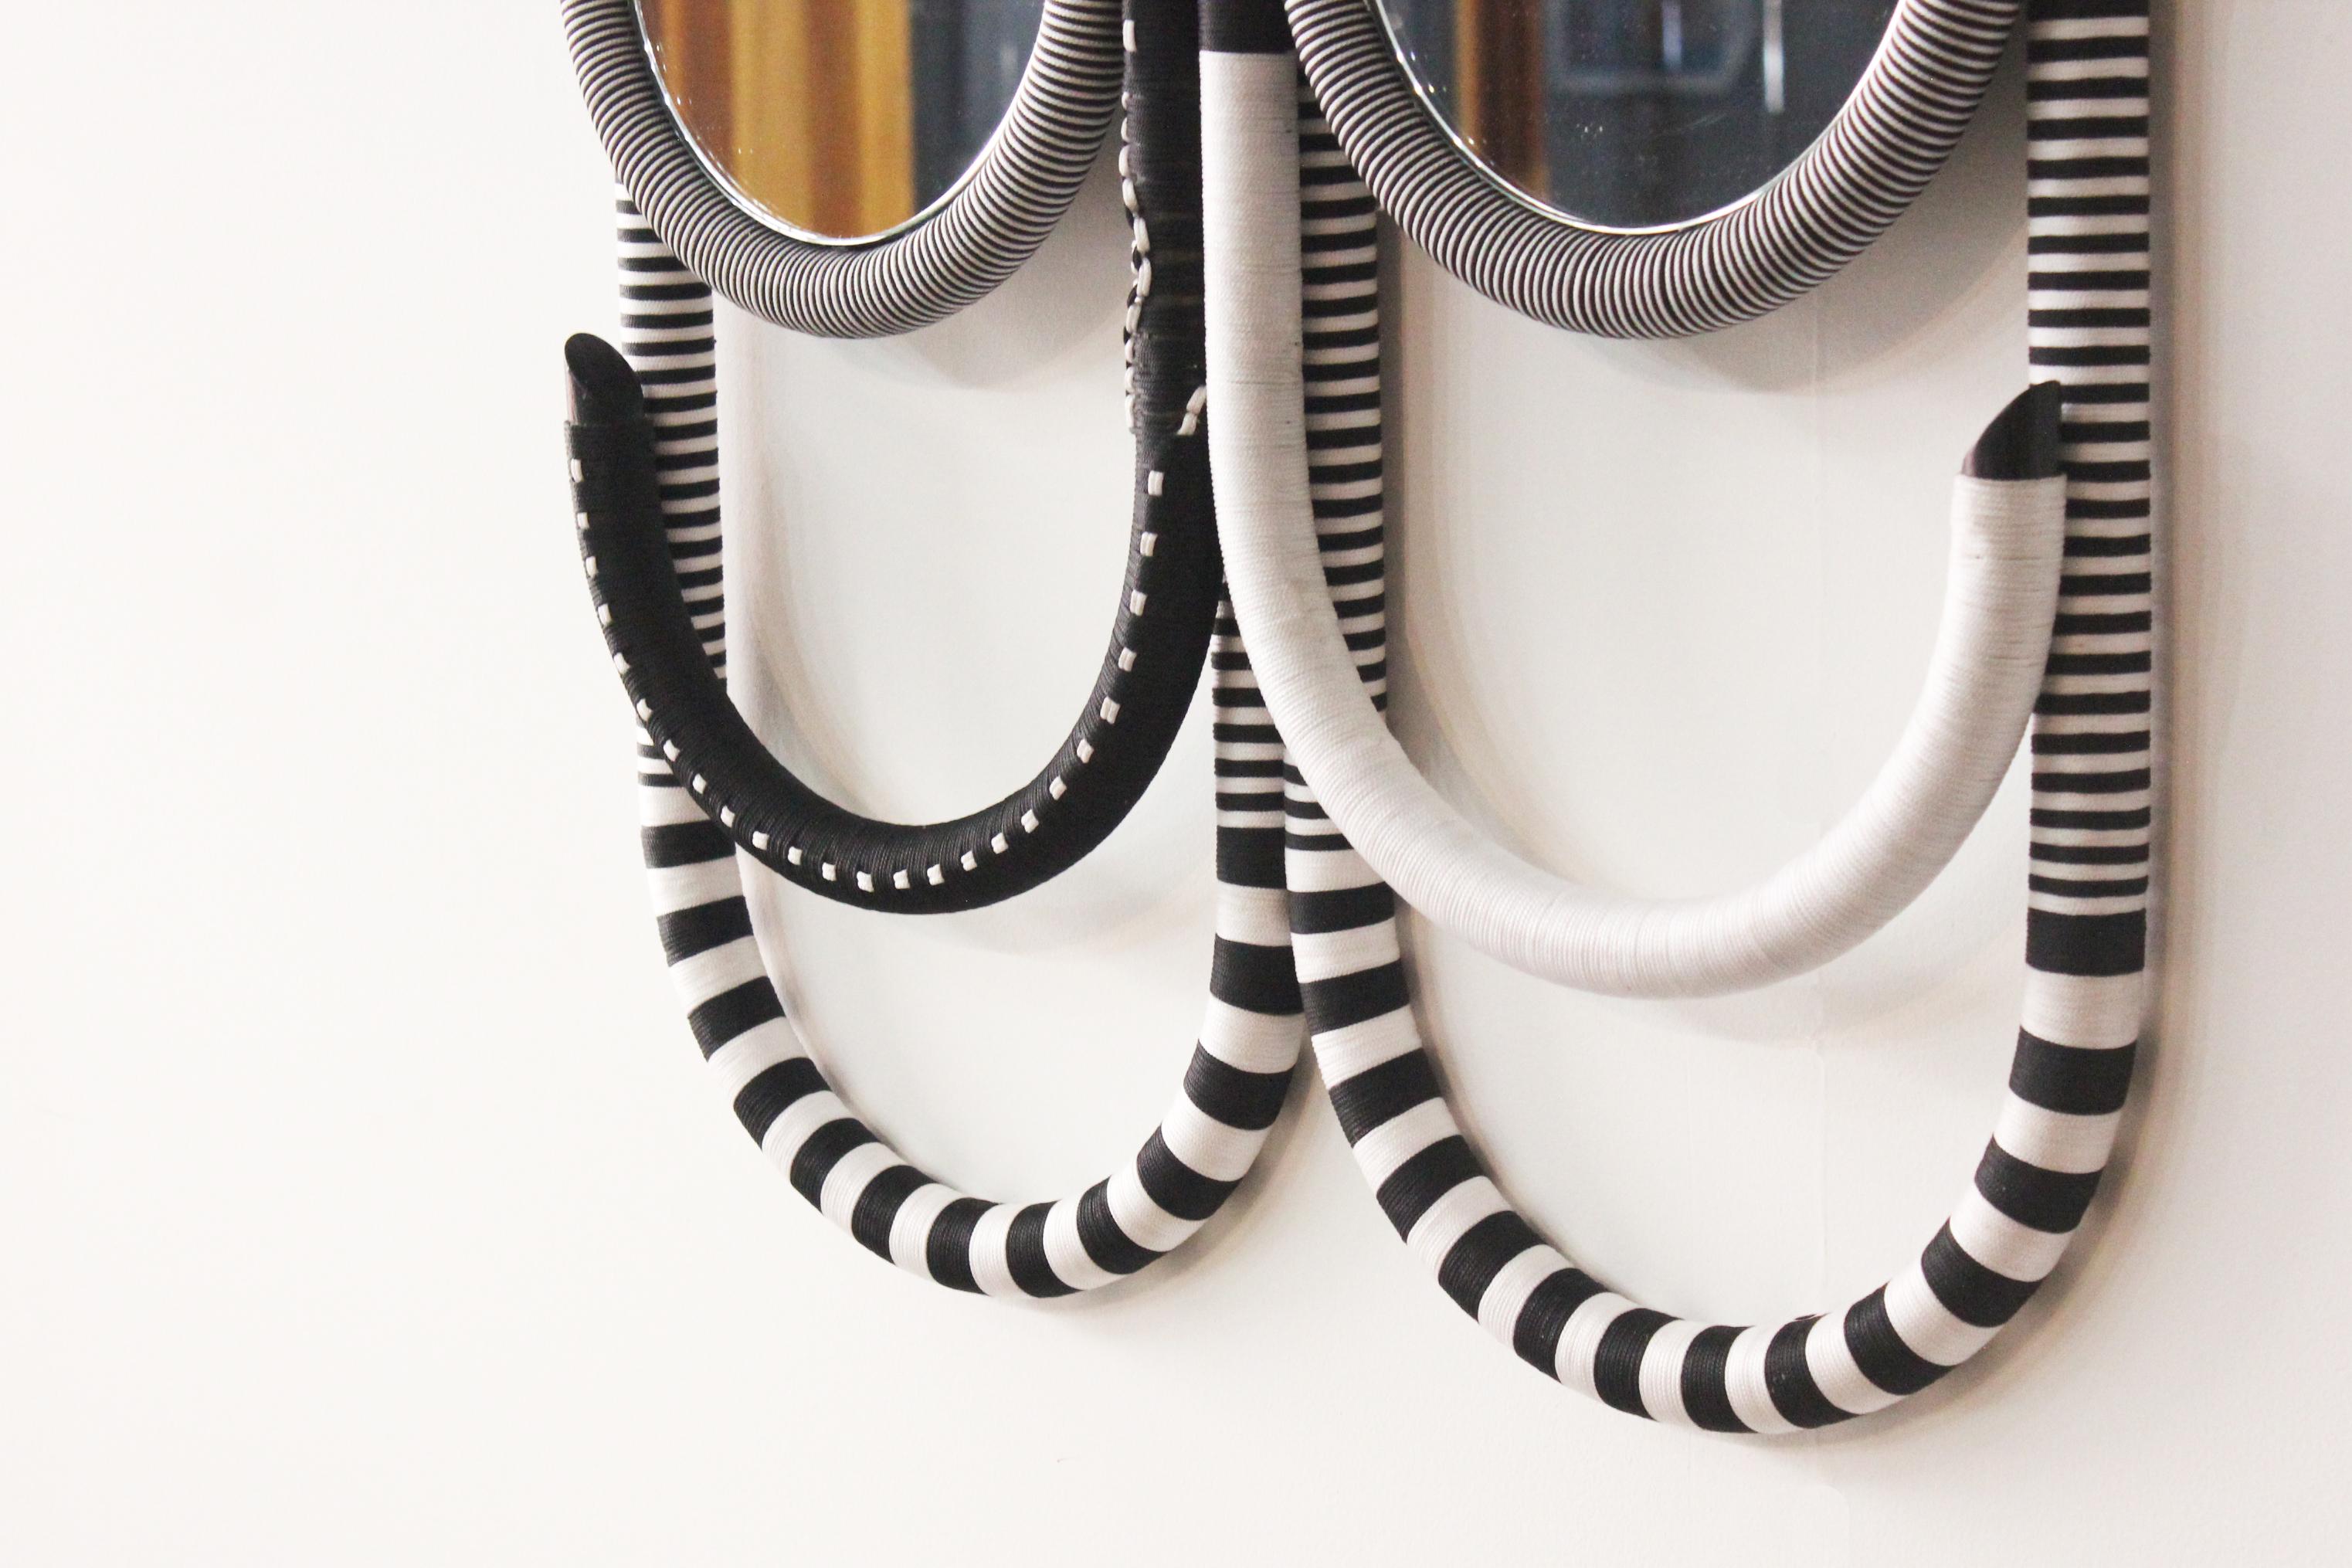 The Kitt mirror is a simplified translation of symbolic tribal visual language. The hand-curved rattan base is overworked with cording techniques in contrasting black and white to reflect African tribal bead accessories.